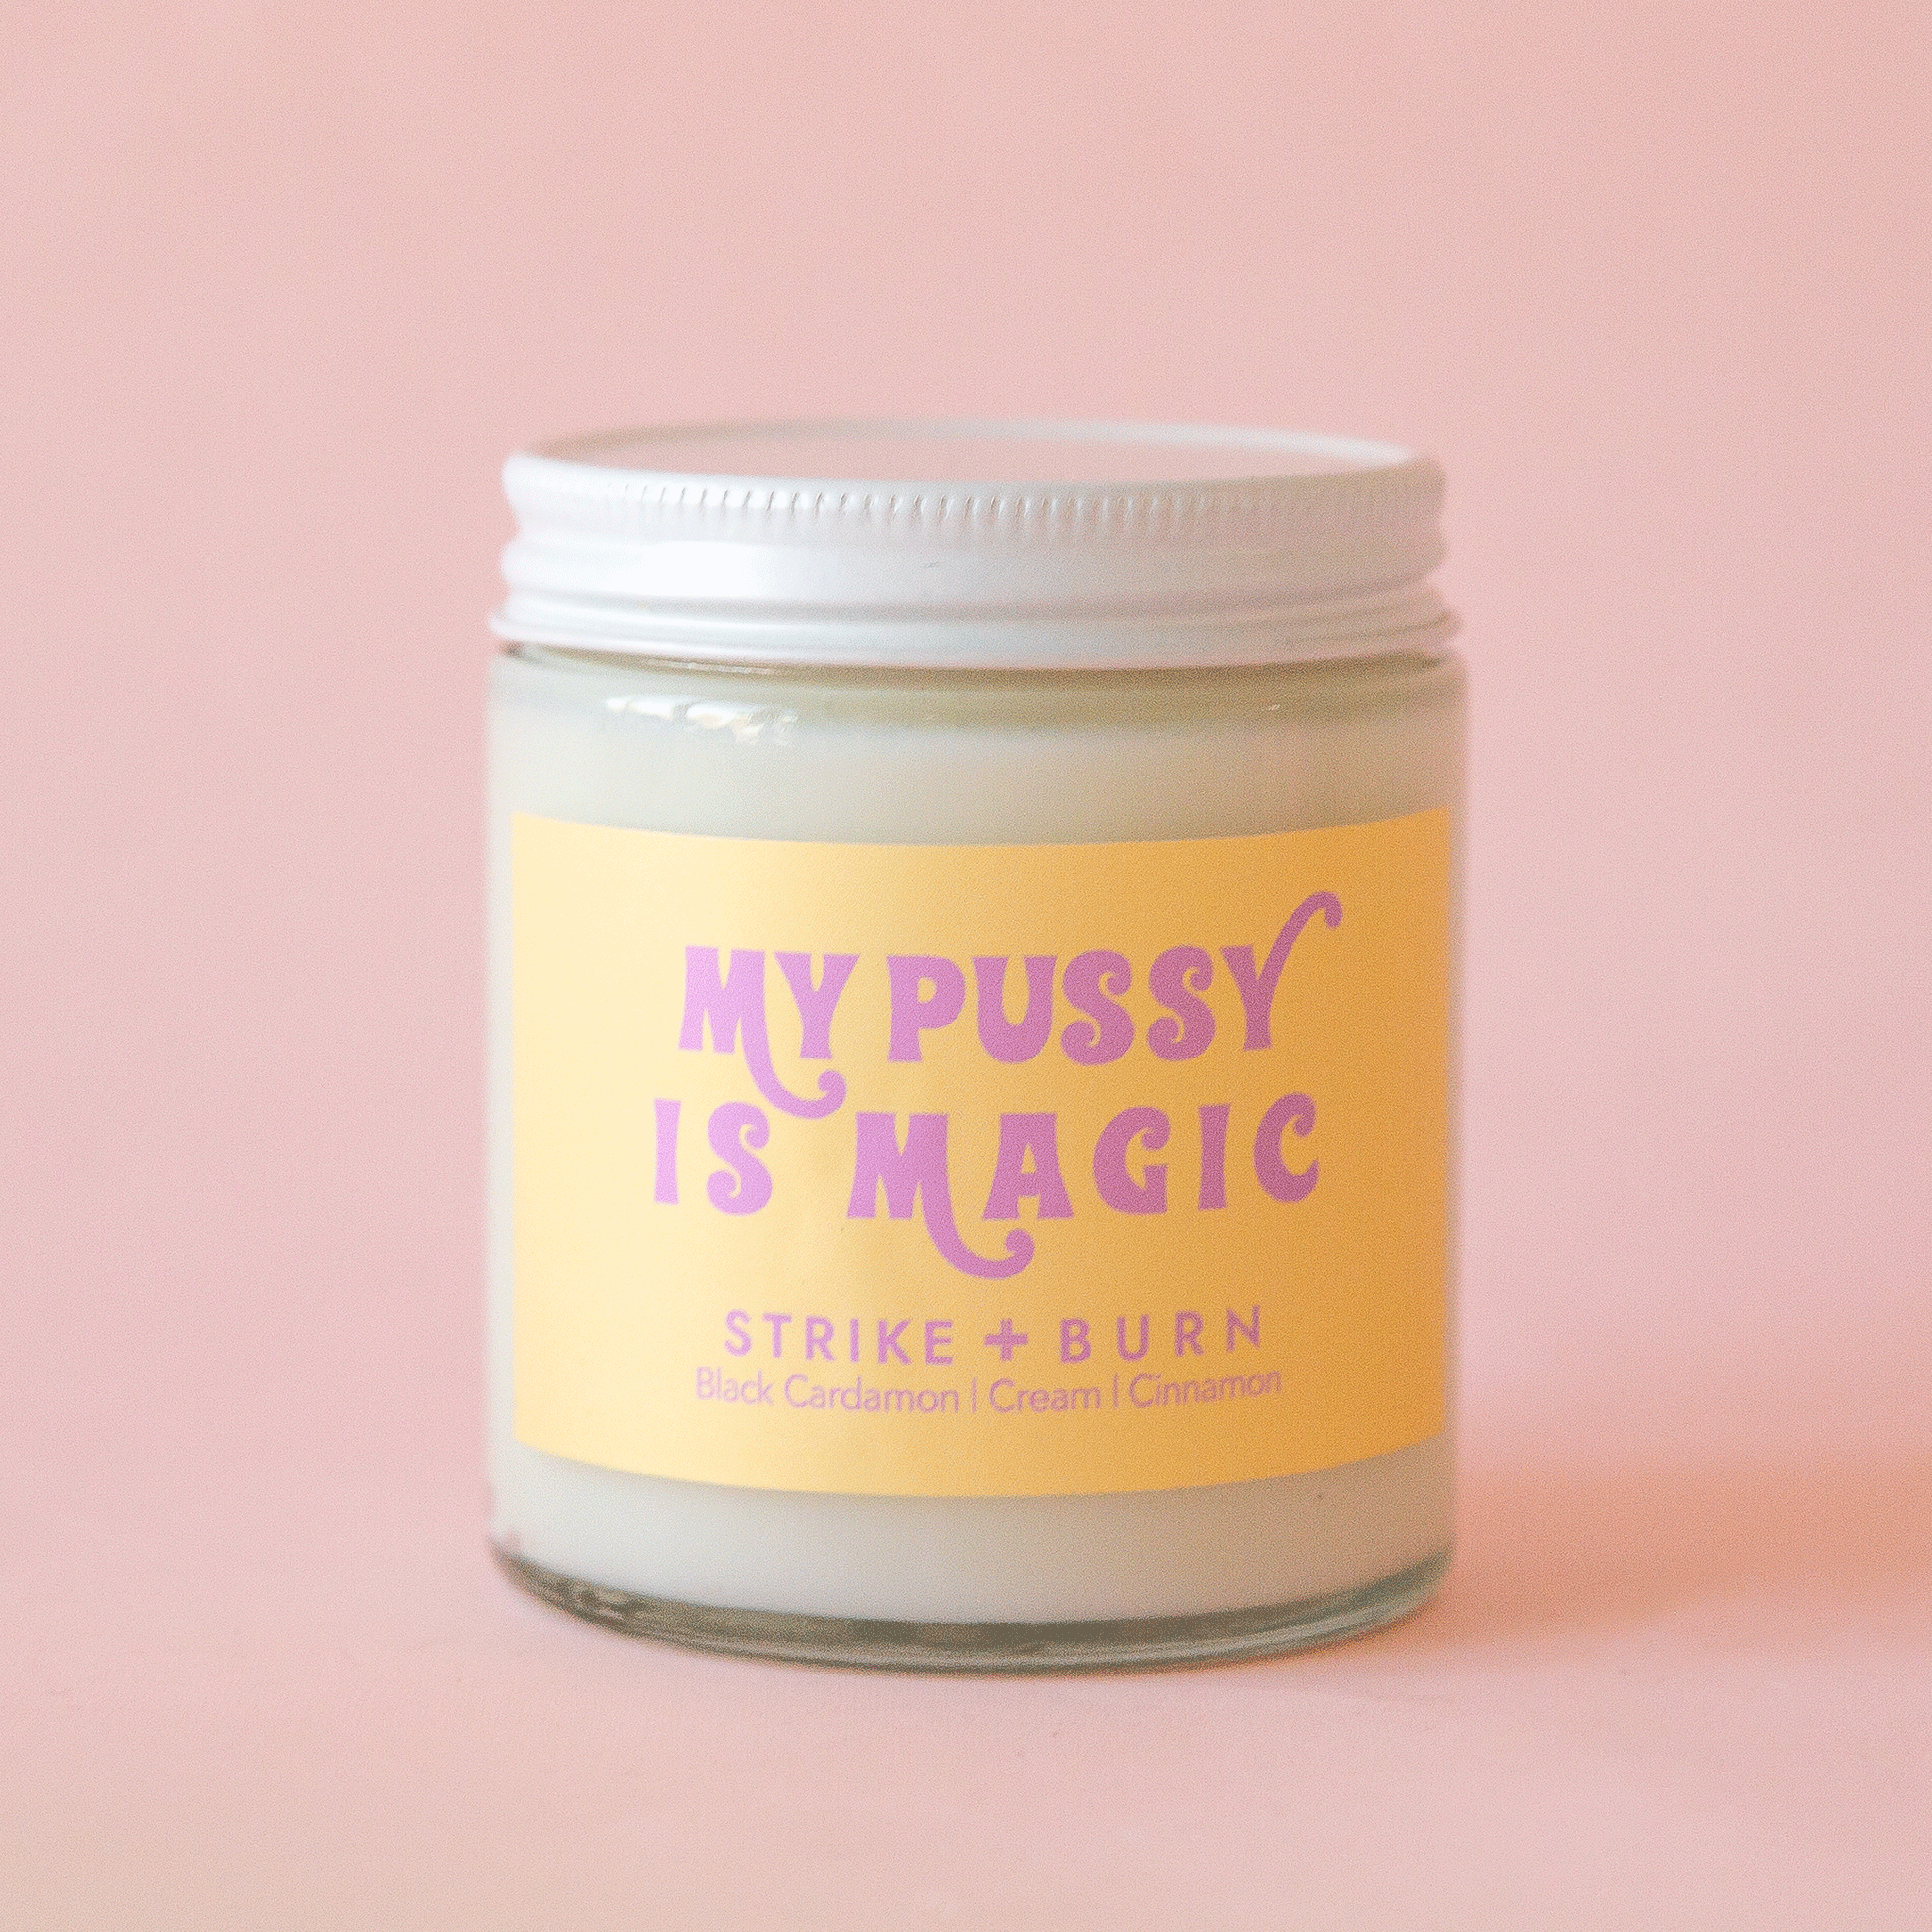 On a pink background is a white glass candle with a white lid and a yellow label on the front with pink text that reads, "My Pussy Is Magic Strike + Burn".